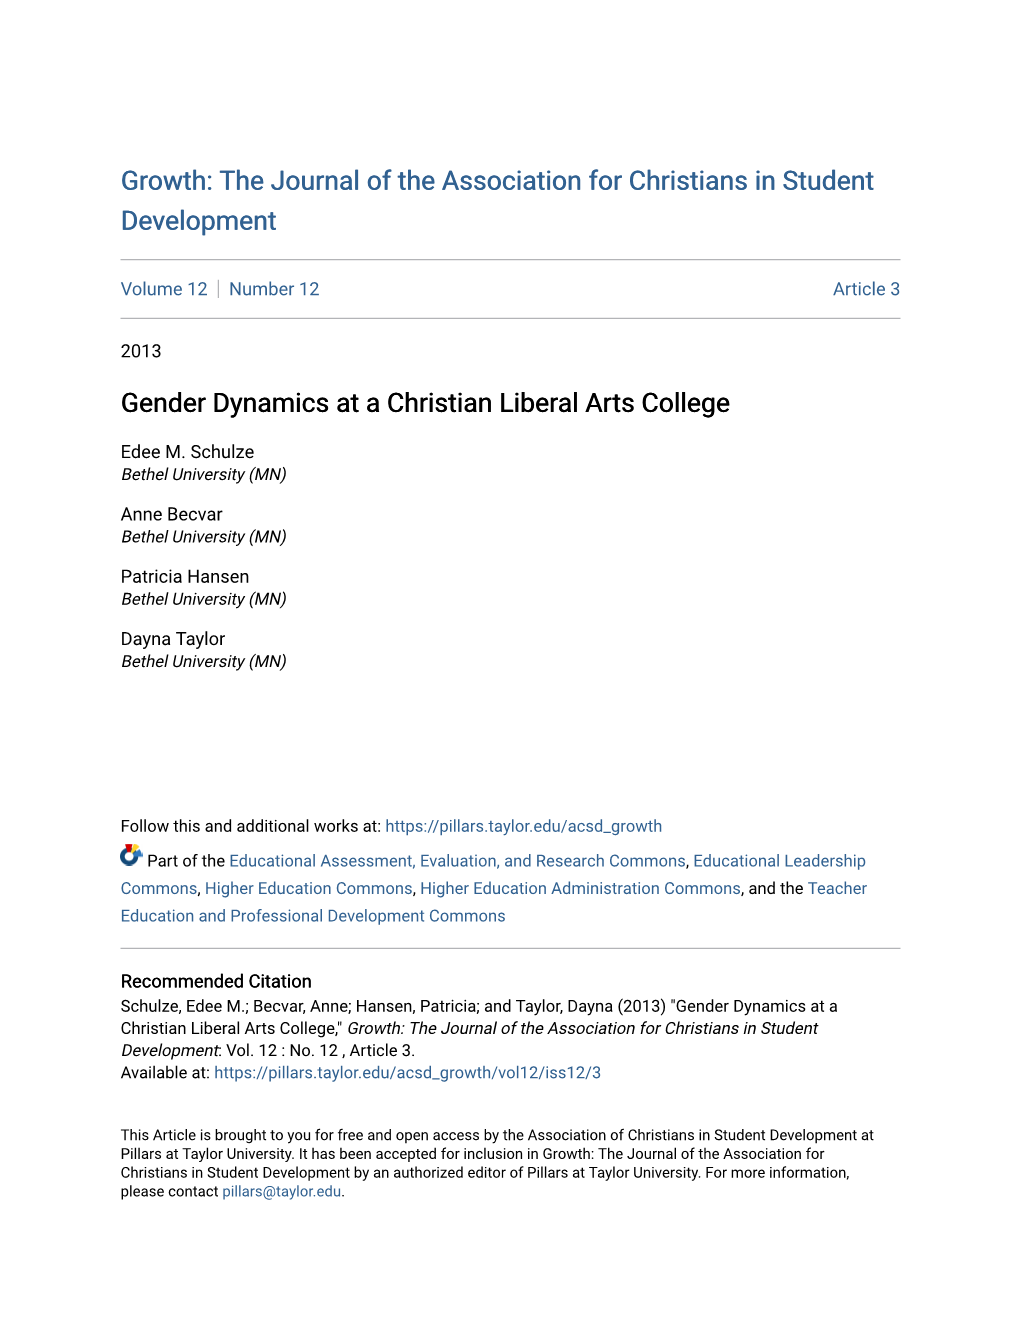 Gender Dynamics at a Christian Liberal Arts College